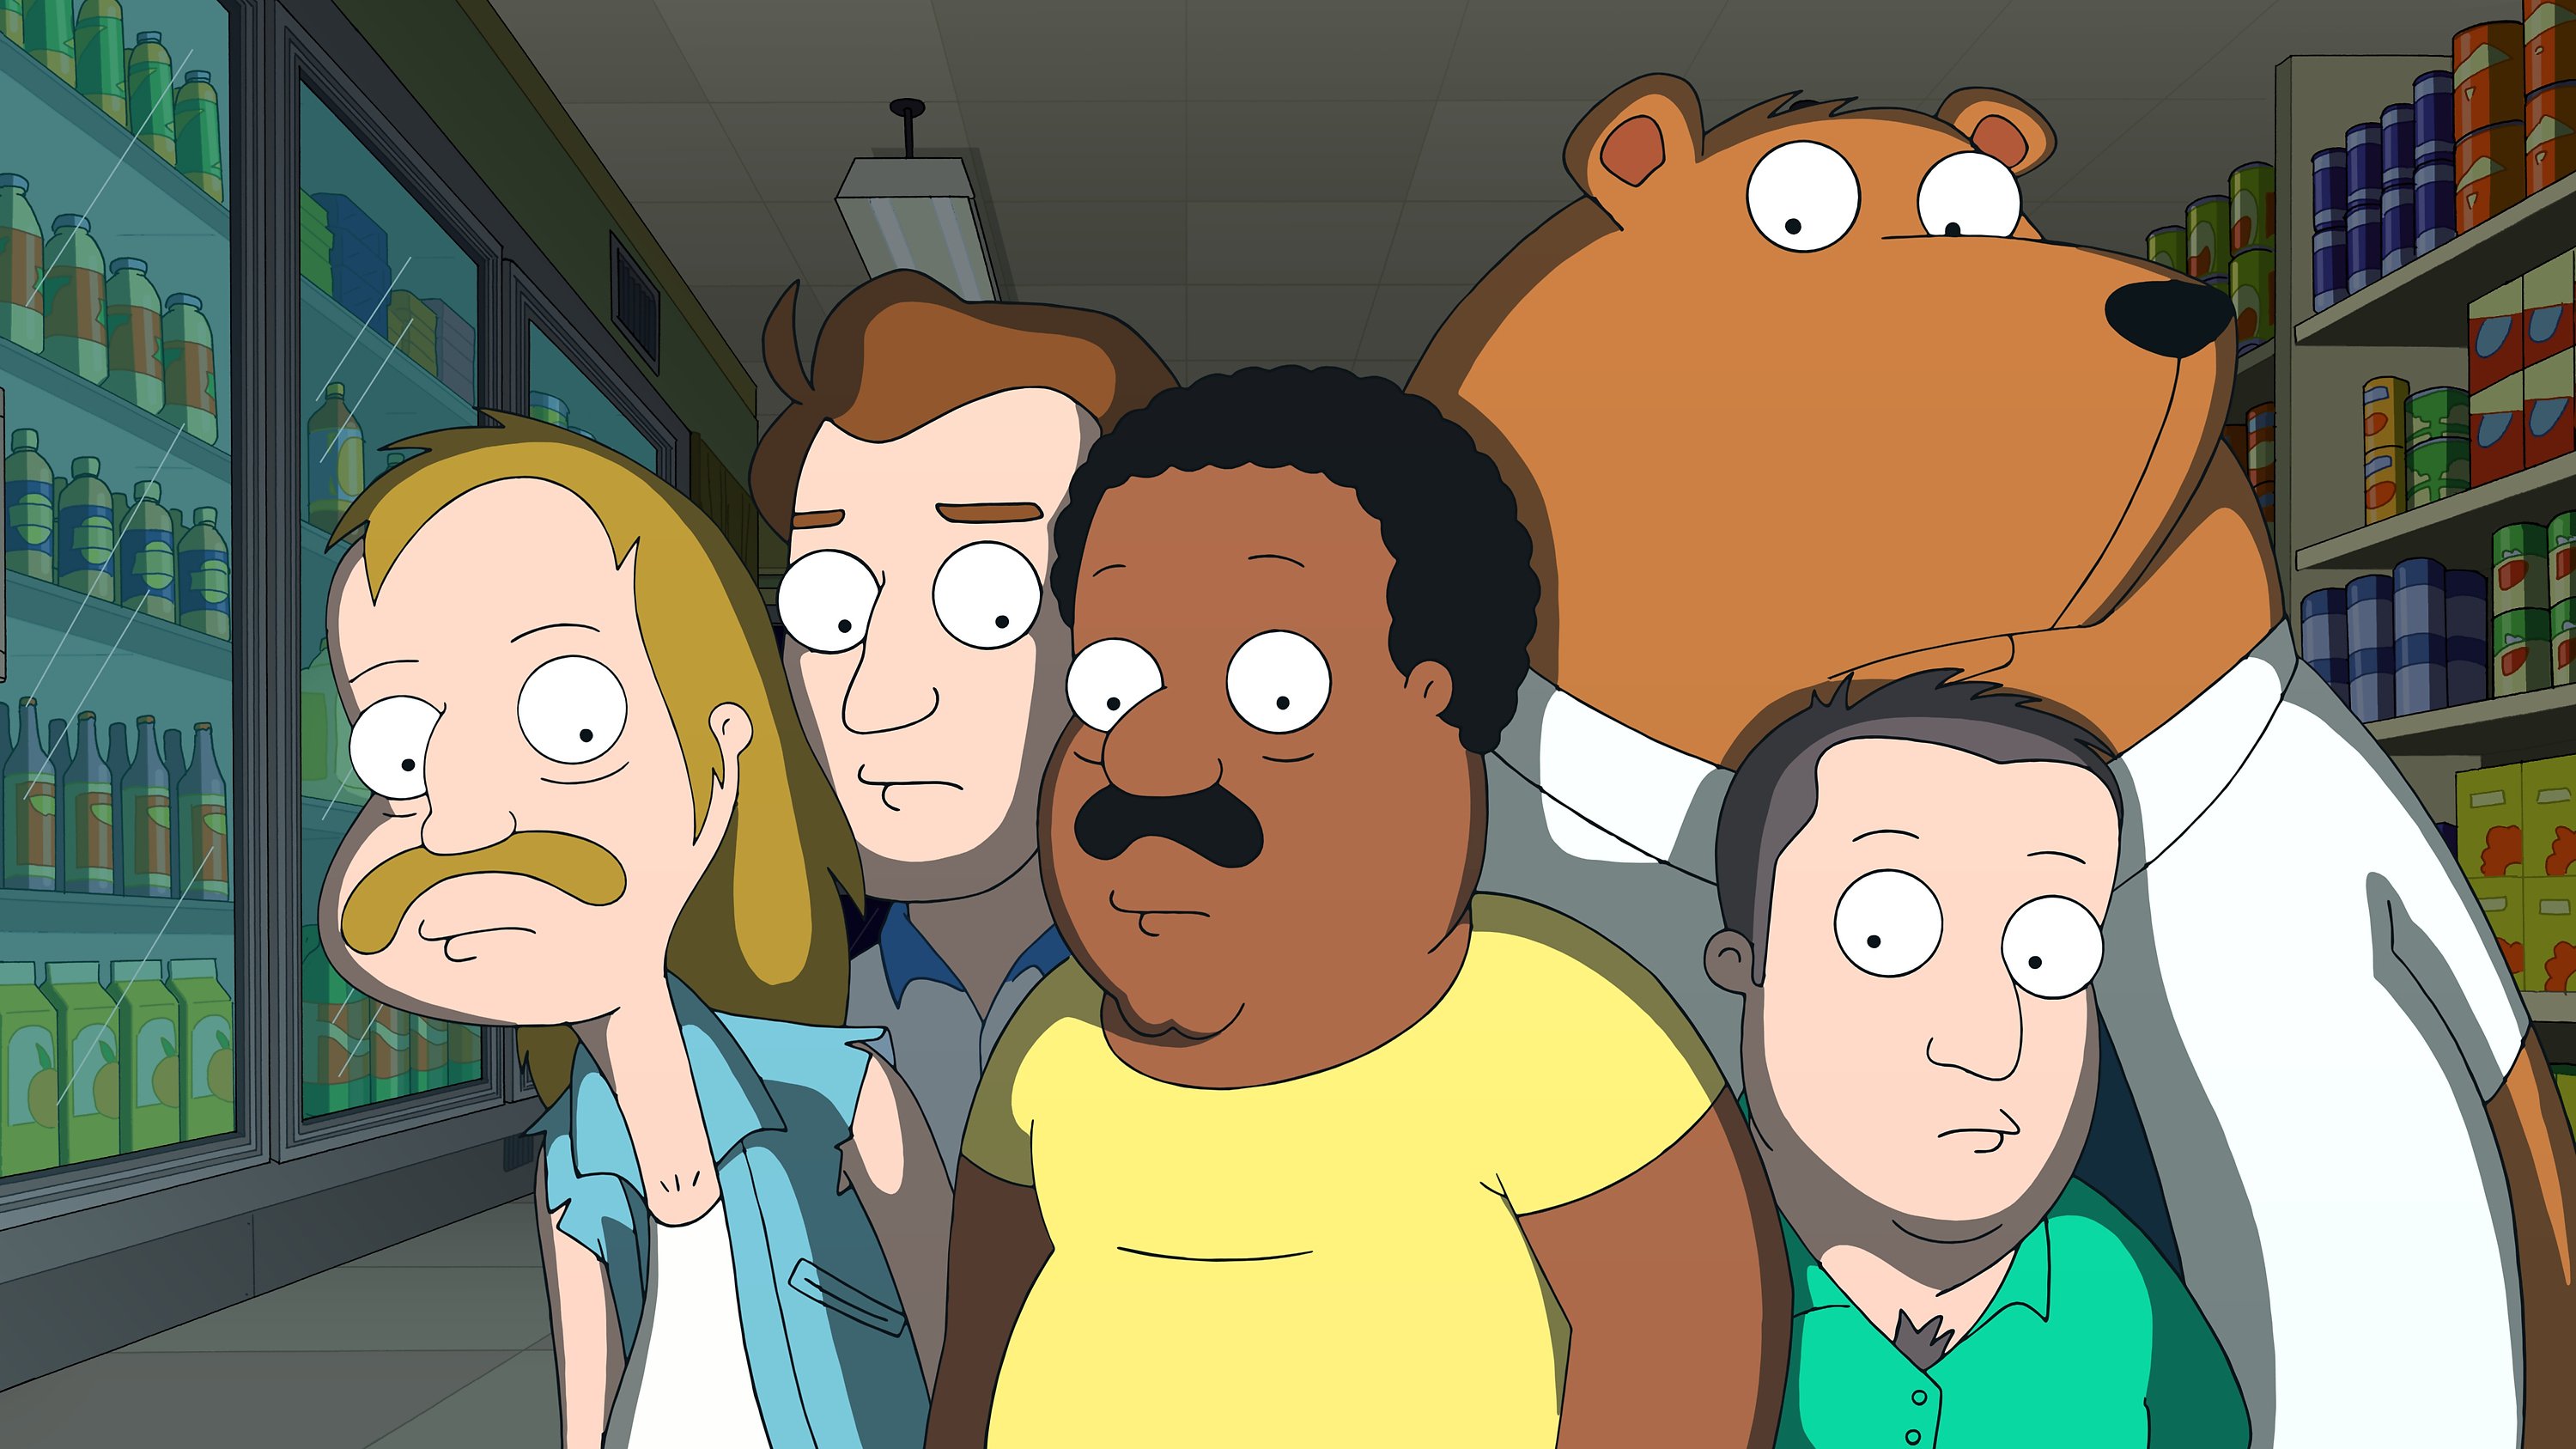 'The Cleveland Show' characters in a convenience store setting.